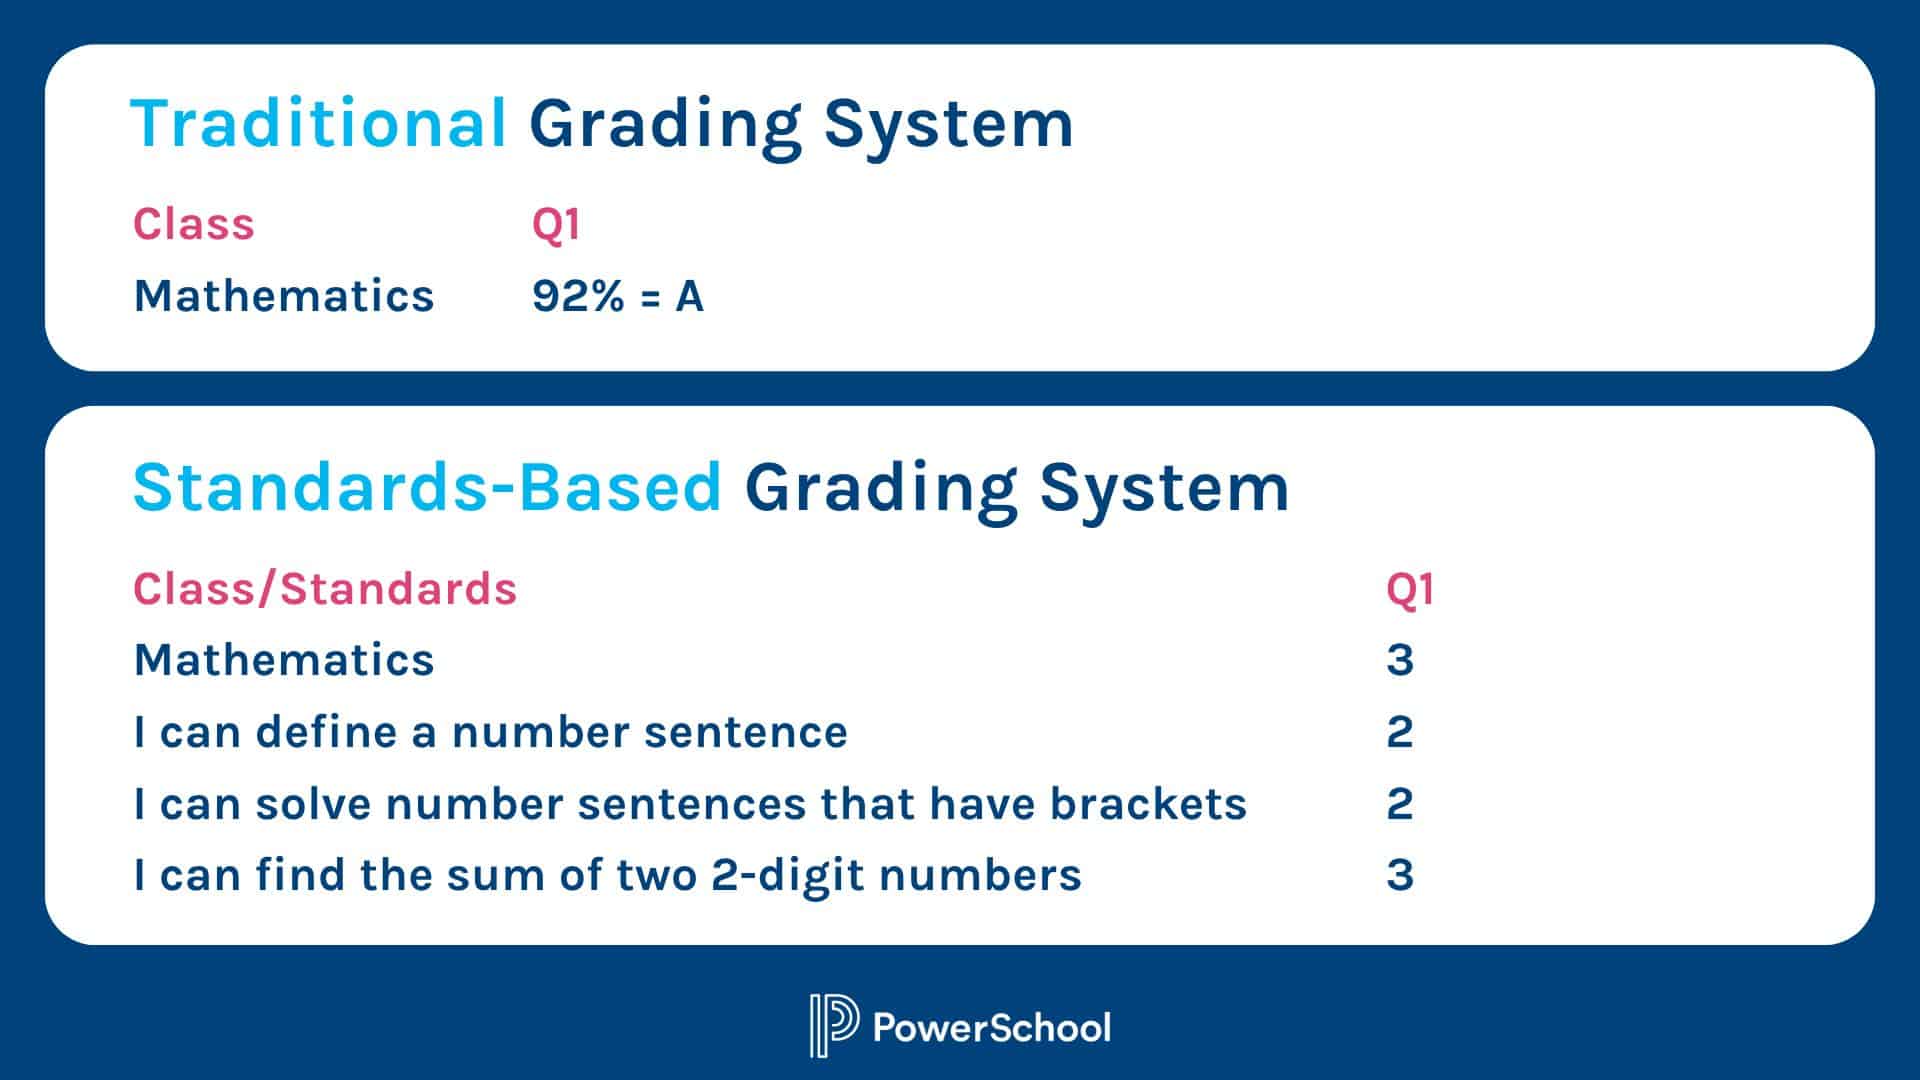 Level of Evidence Grading Scale